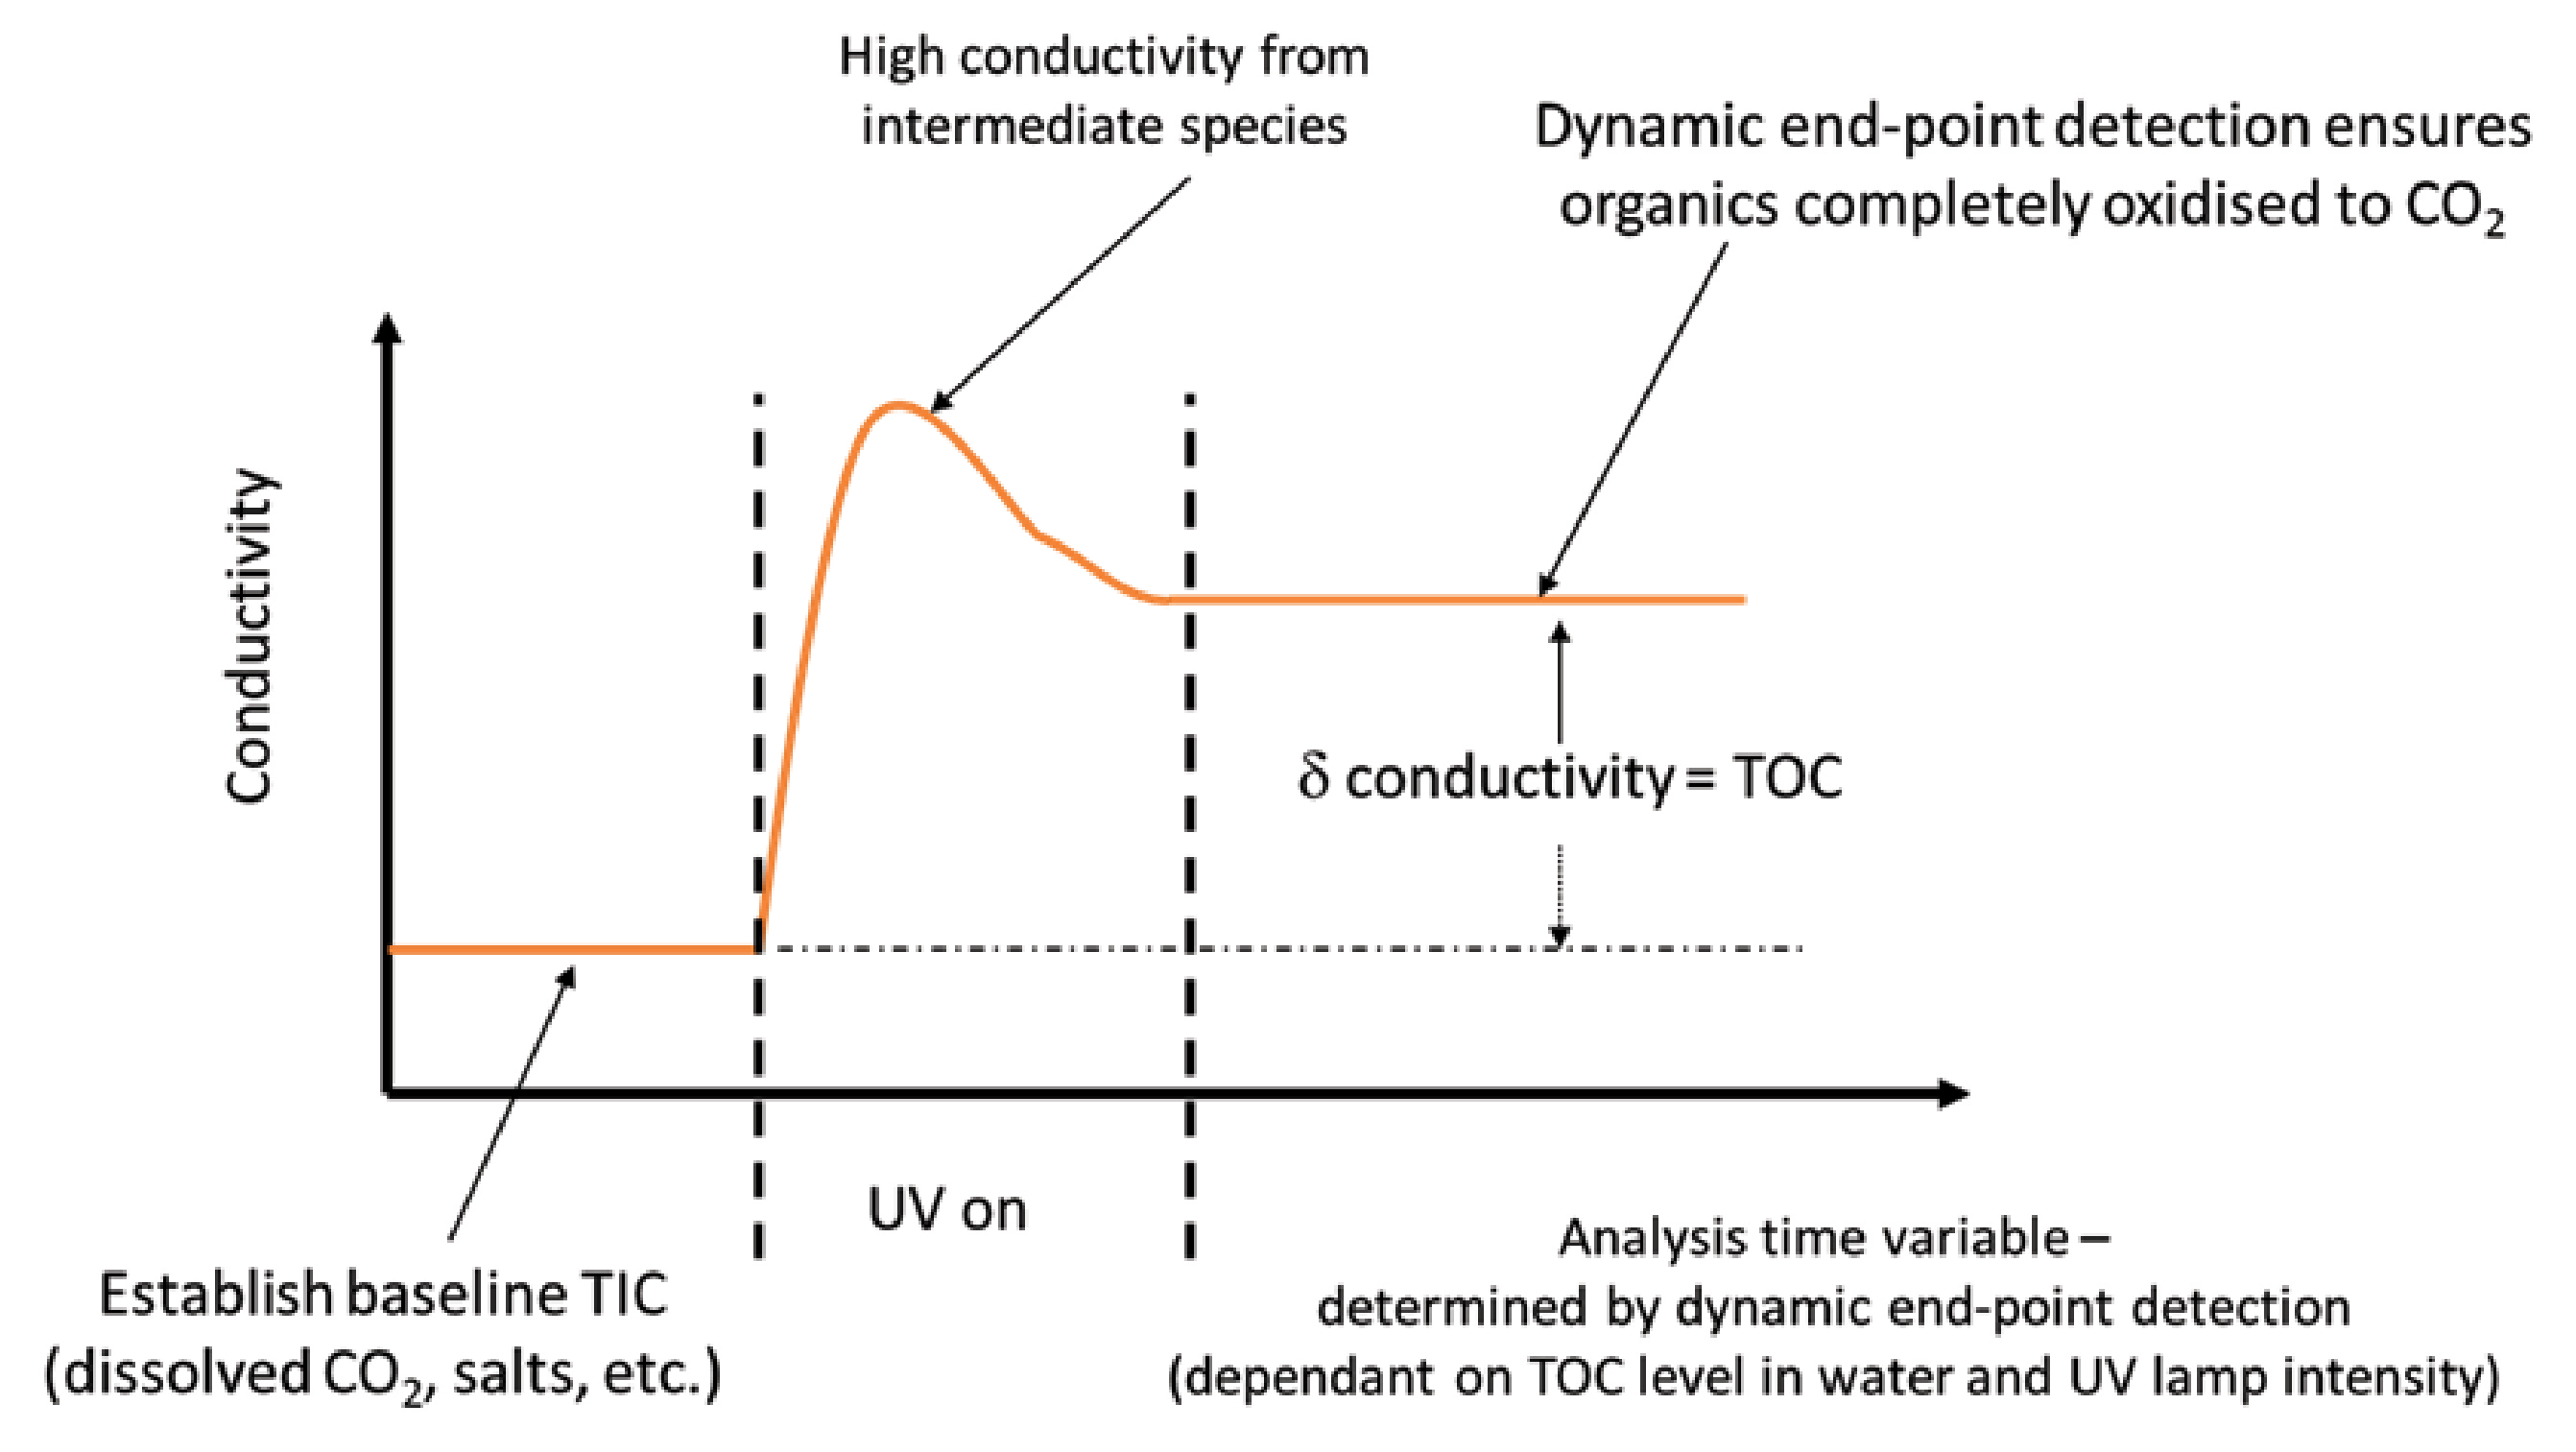 Beckman Coulter PAT700 uses dynamic end-point detection to ensure complete oxidation for accurate TOC analysis, even when UV lamp intensity decreases